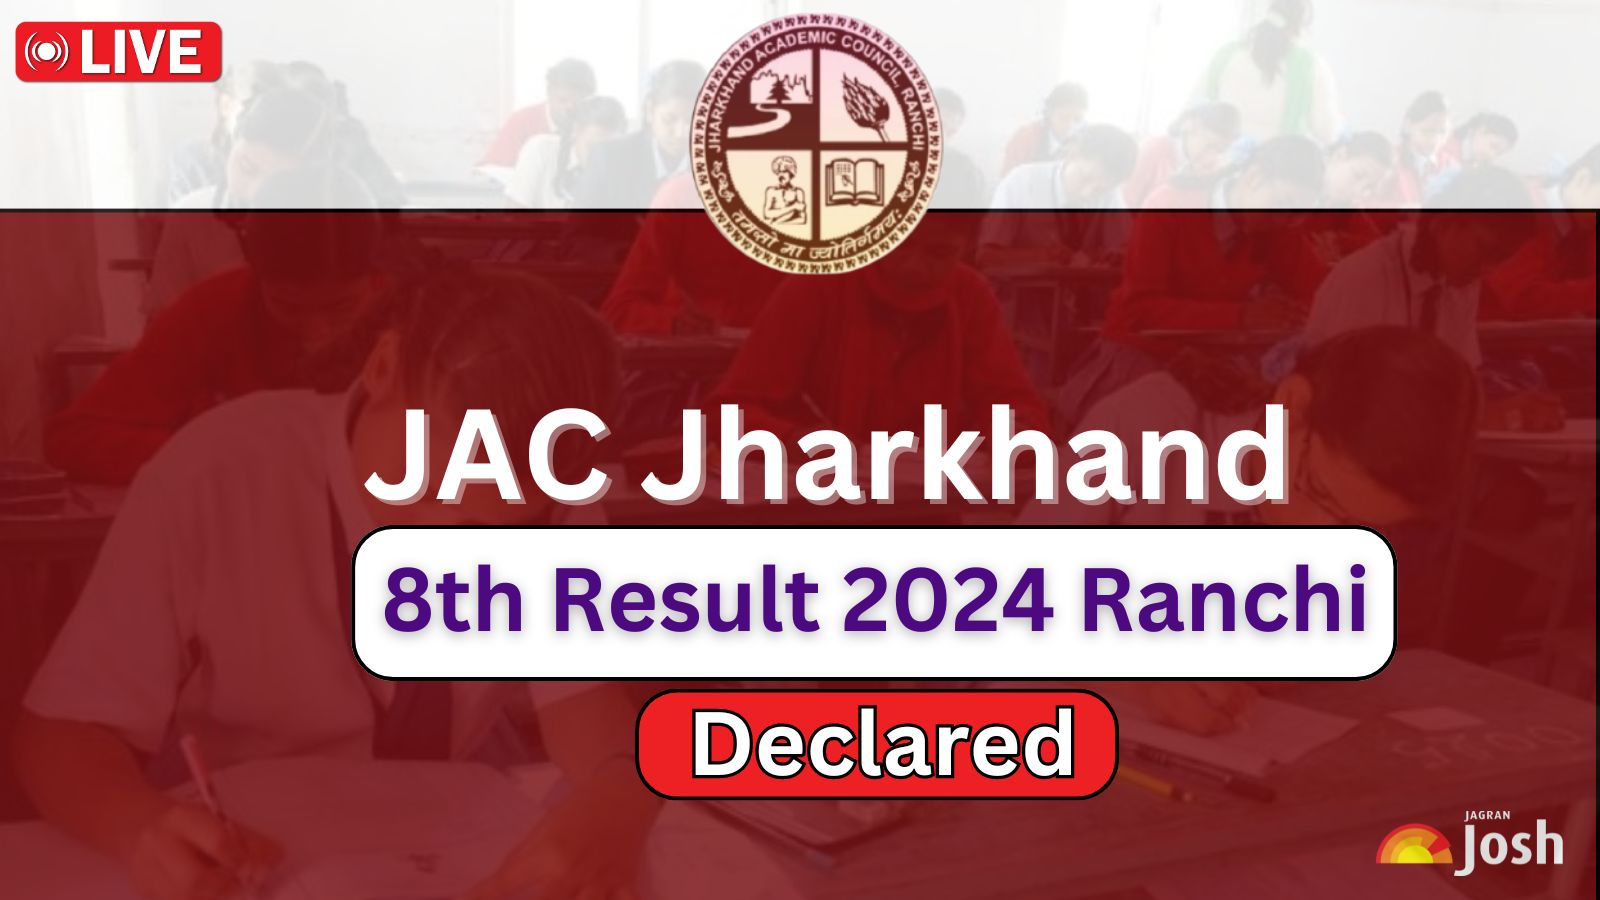 [Declared] JAC 8th Result 2024: 94% स्टूडेंट्स पास, Check Jharkhand Board Class 8 Results at jacresults.com, Download Marksheet Here with Roll Number